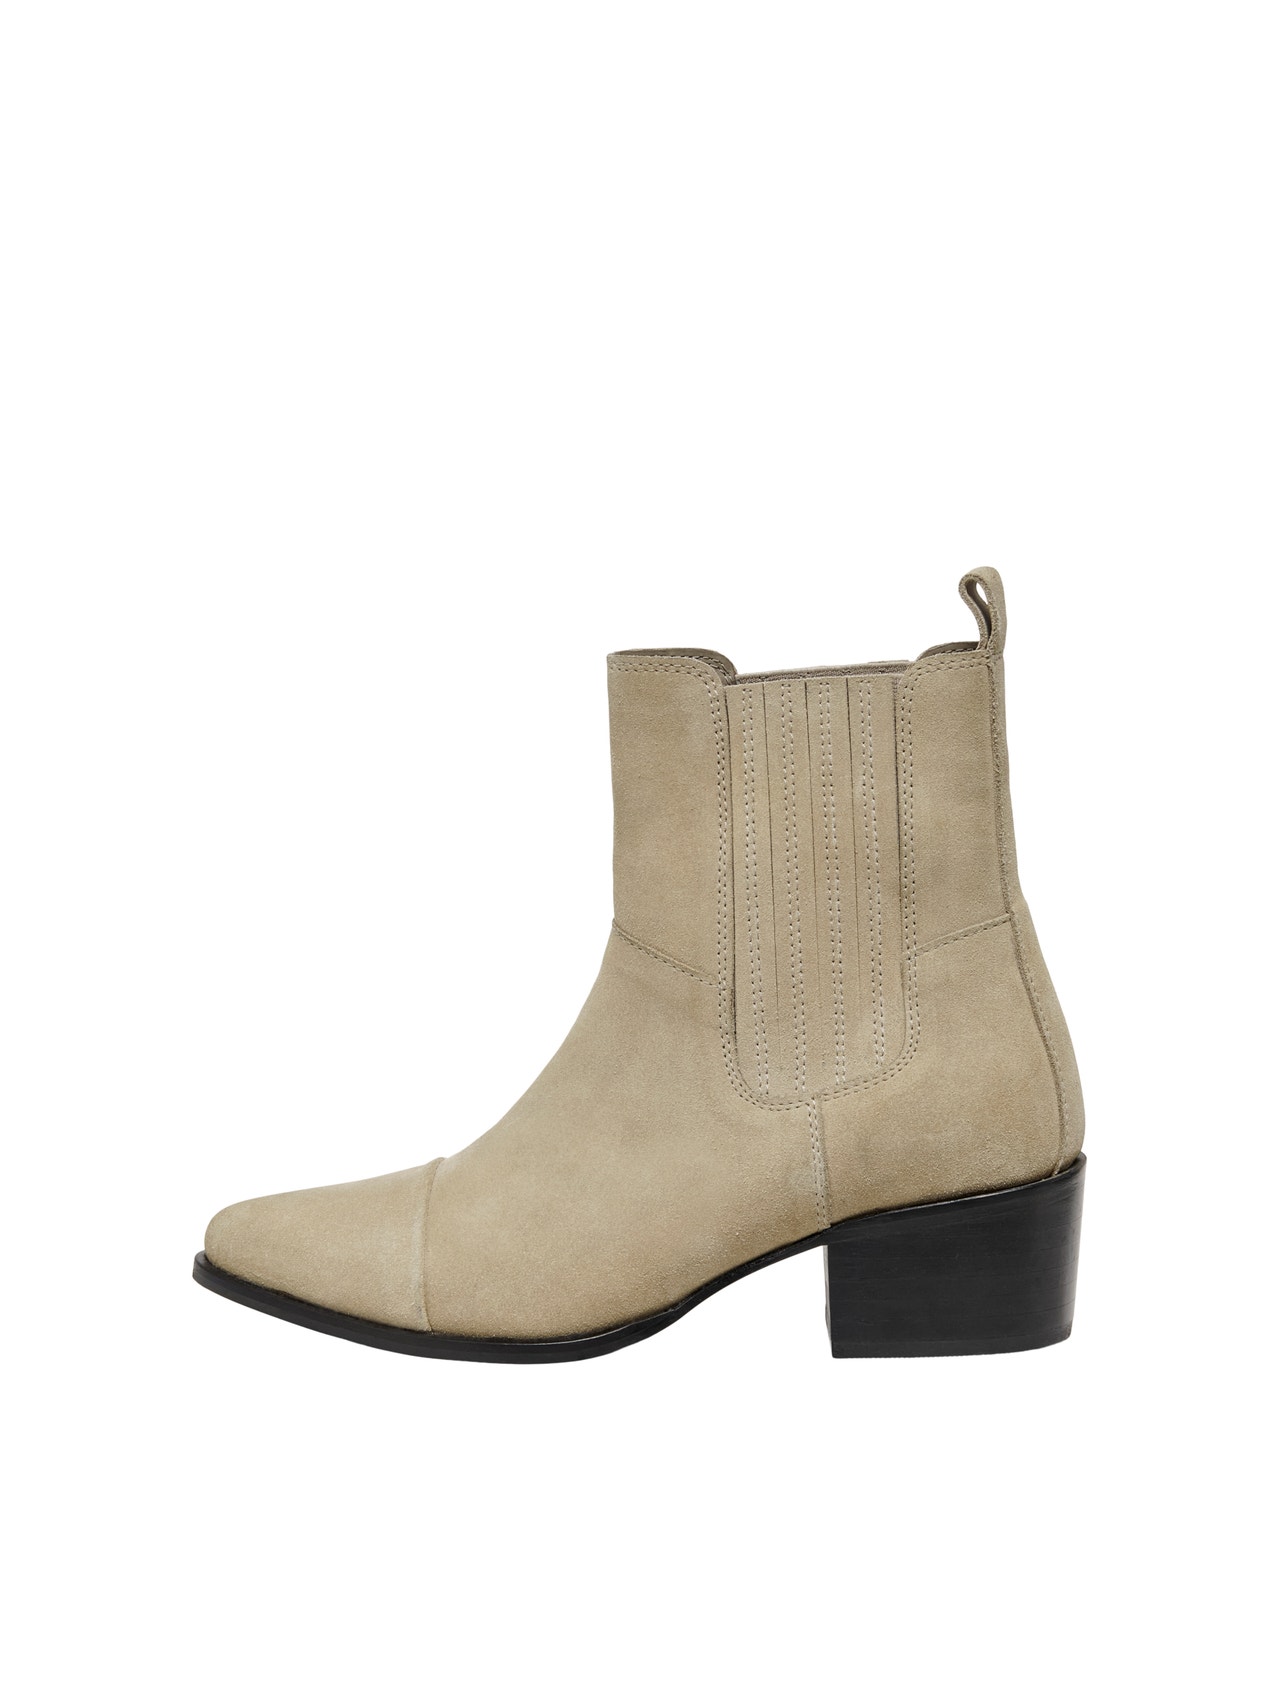 ONLY Suede Boots -Beige - 15287475